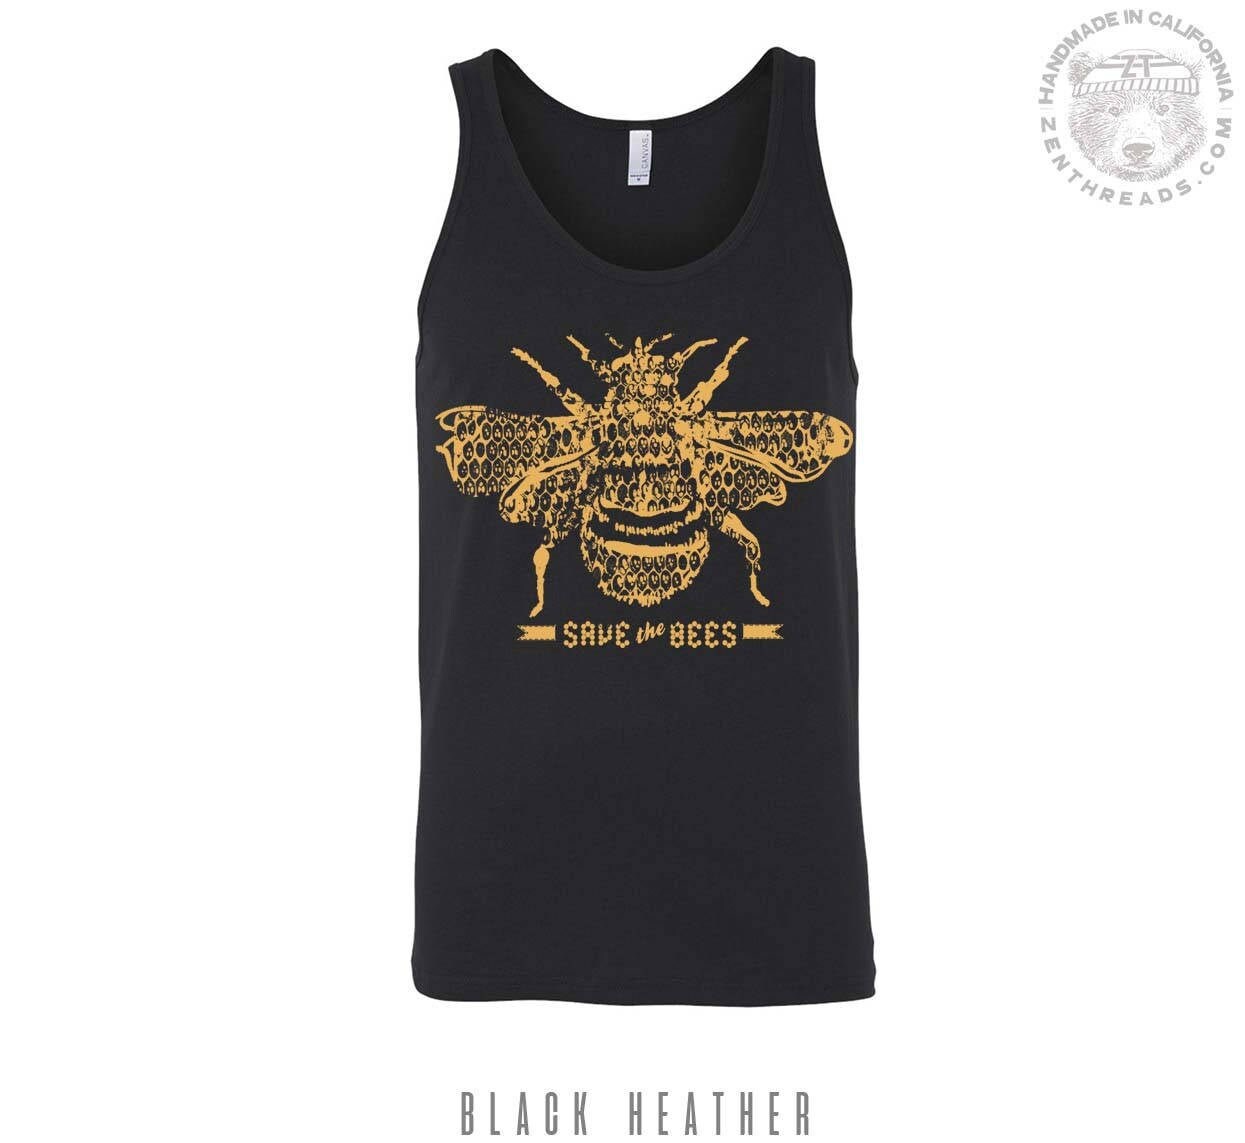 Unisex Save The Bees Tri Blend Tank -Hand Screen Printed Xs S M L Xl Xxl | + Color Options Workout